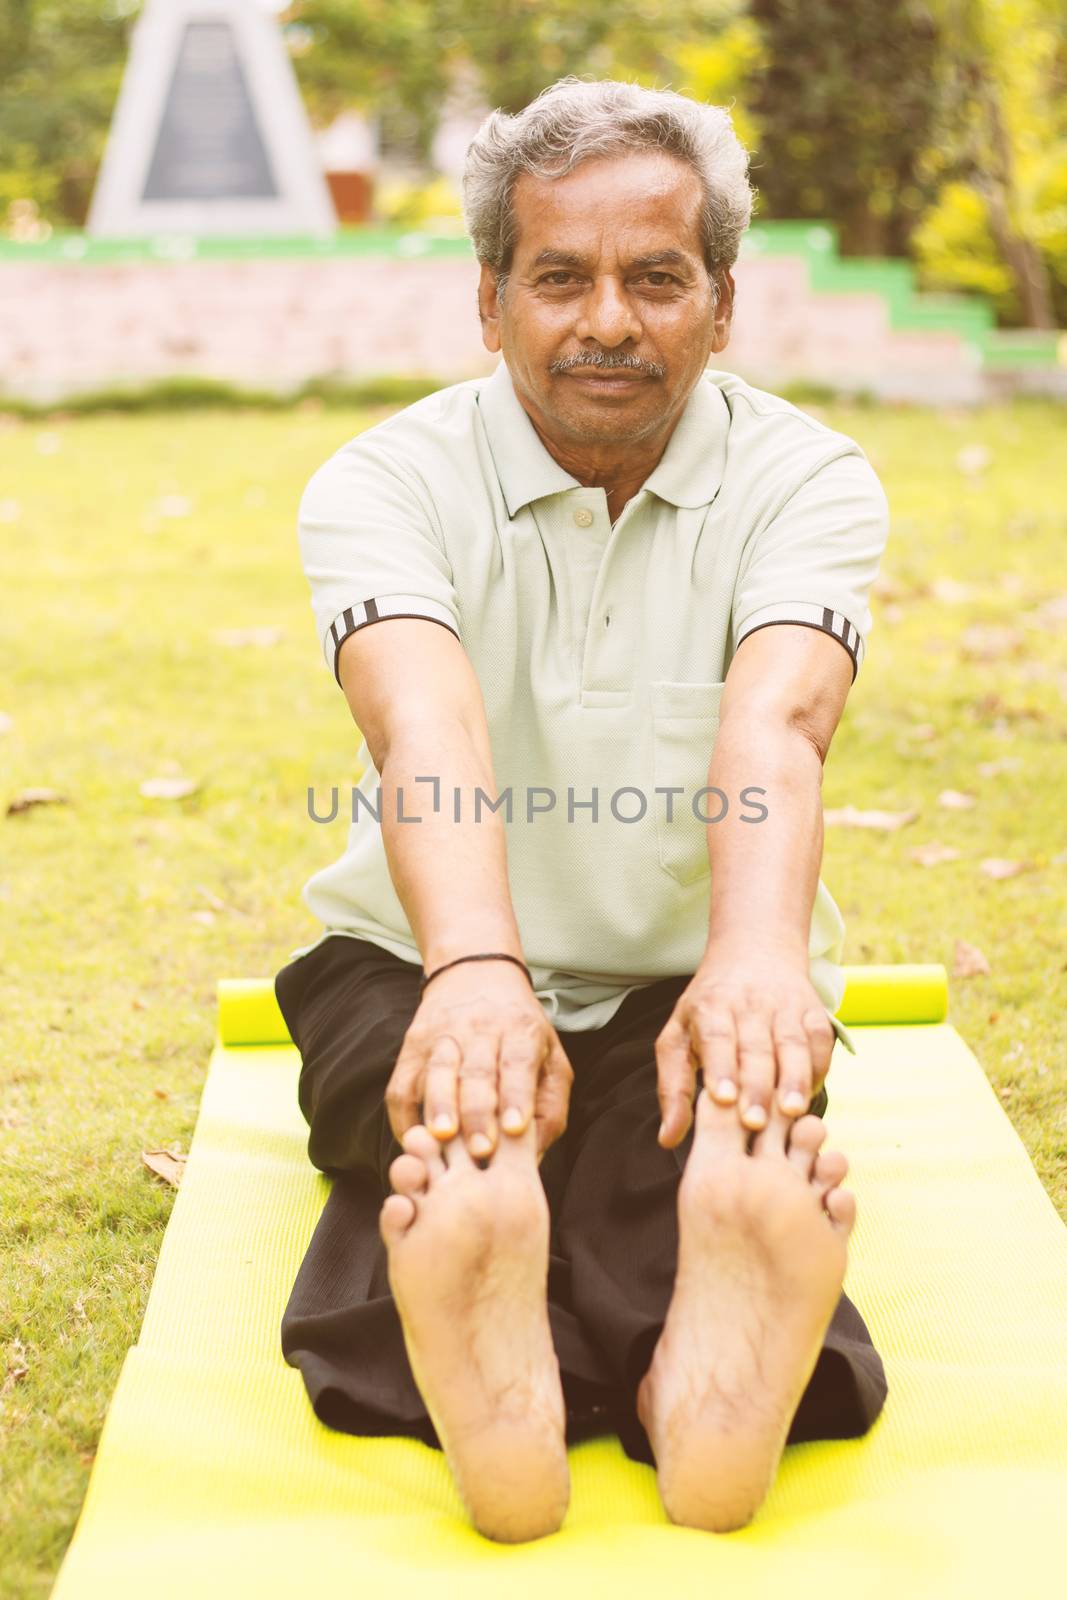 Low-angle full length view of a old man sitting down on exercise or yoga mat touching his toes - Concept of active happy elderly health and fitness by lakshmiprasad.maski@gmai.com